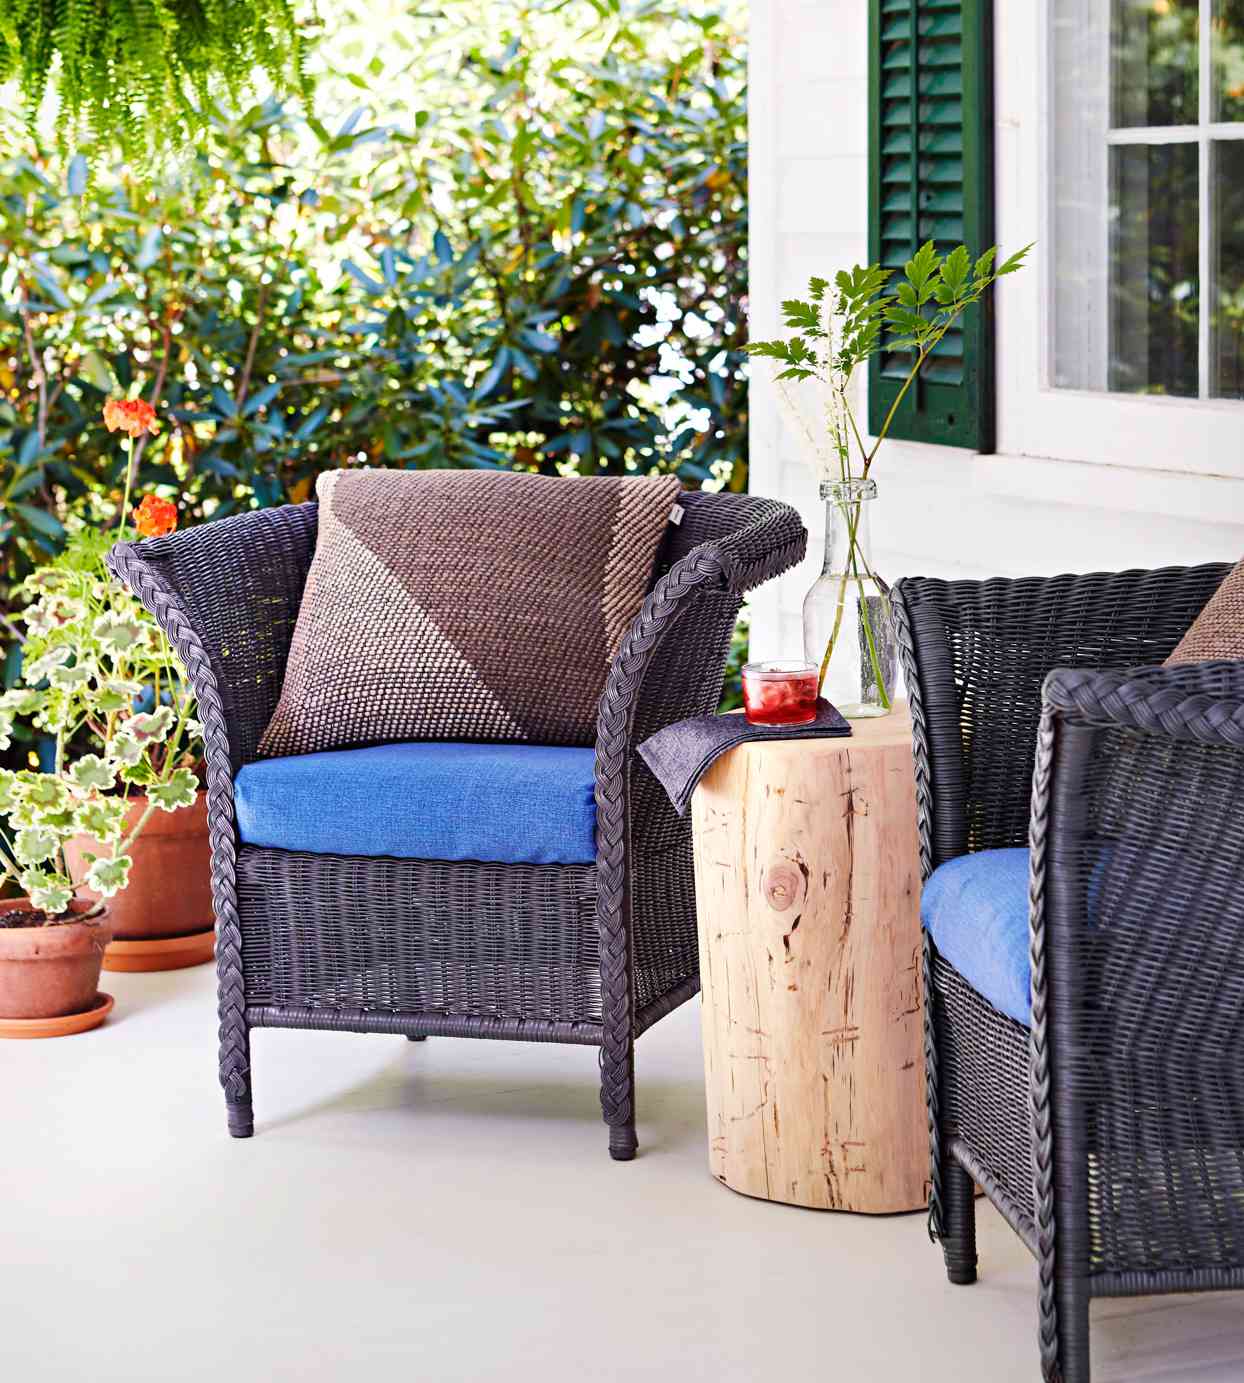 outdoor chairs with blue cushions